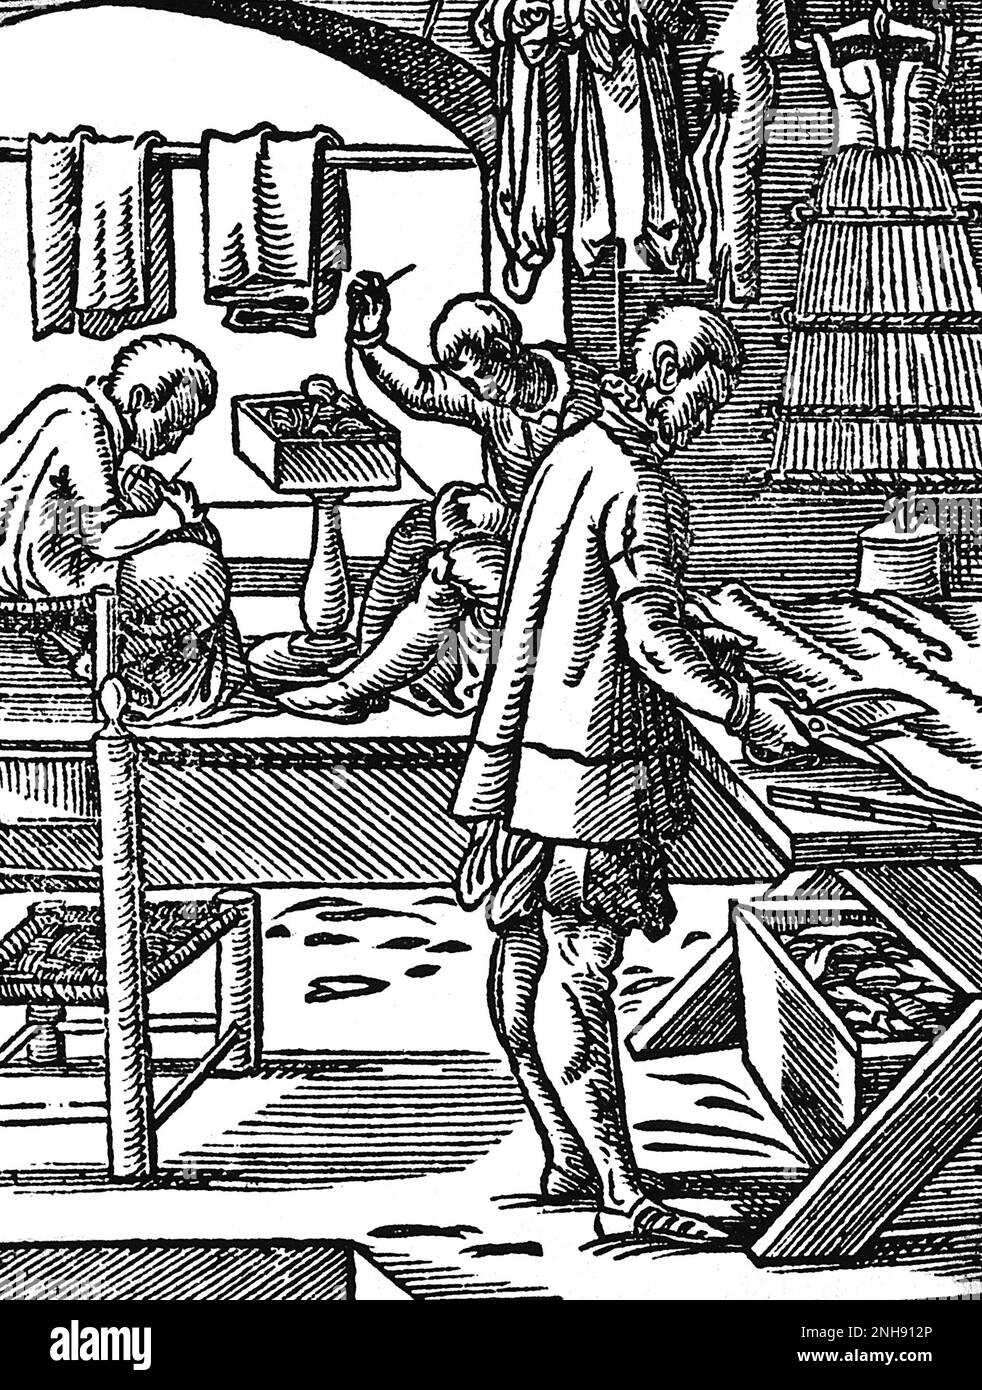 A tailor cutting cloth with scissors while his colleagues sew at a bench. Woodcut from Jost Amman's Book of Trades, 1568. Stock Photo